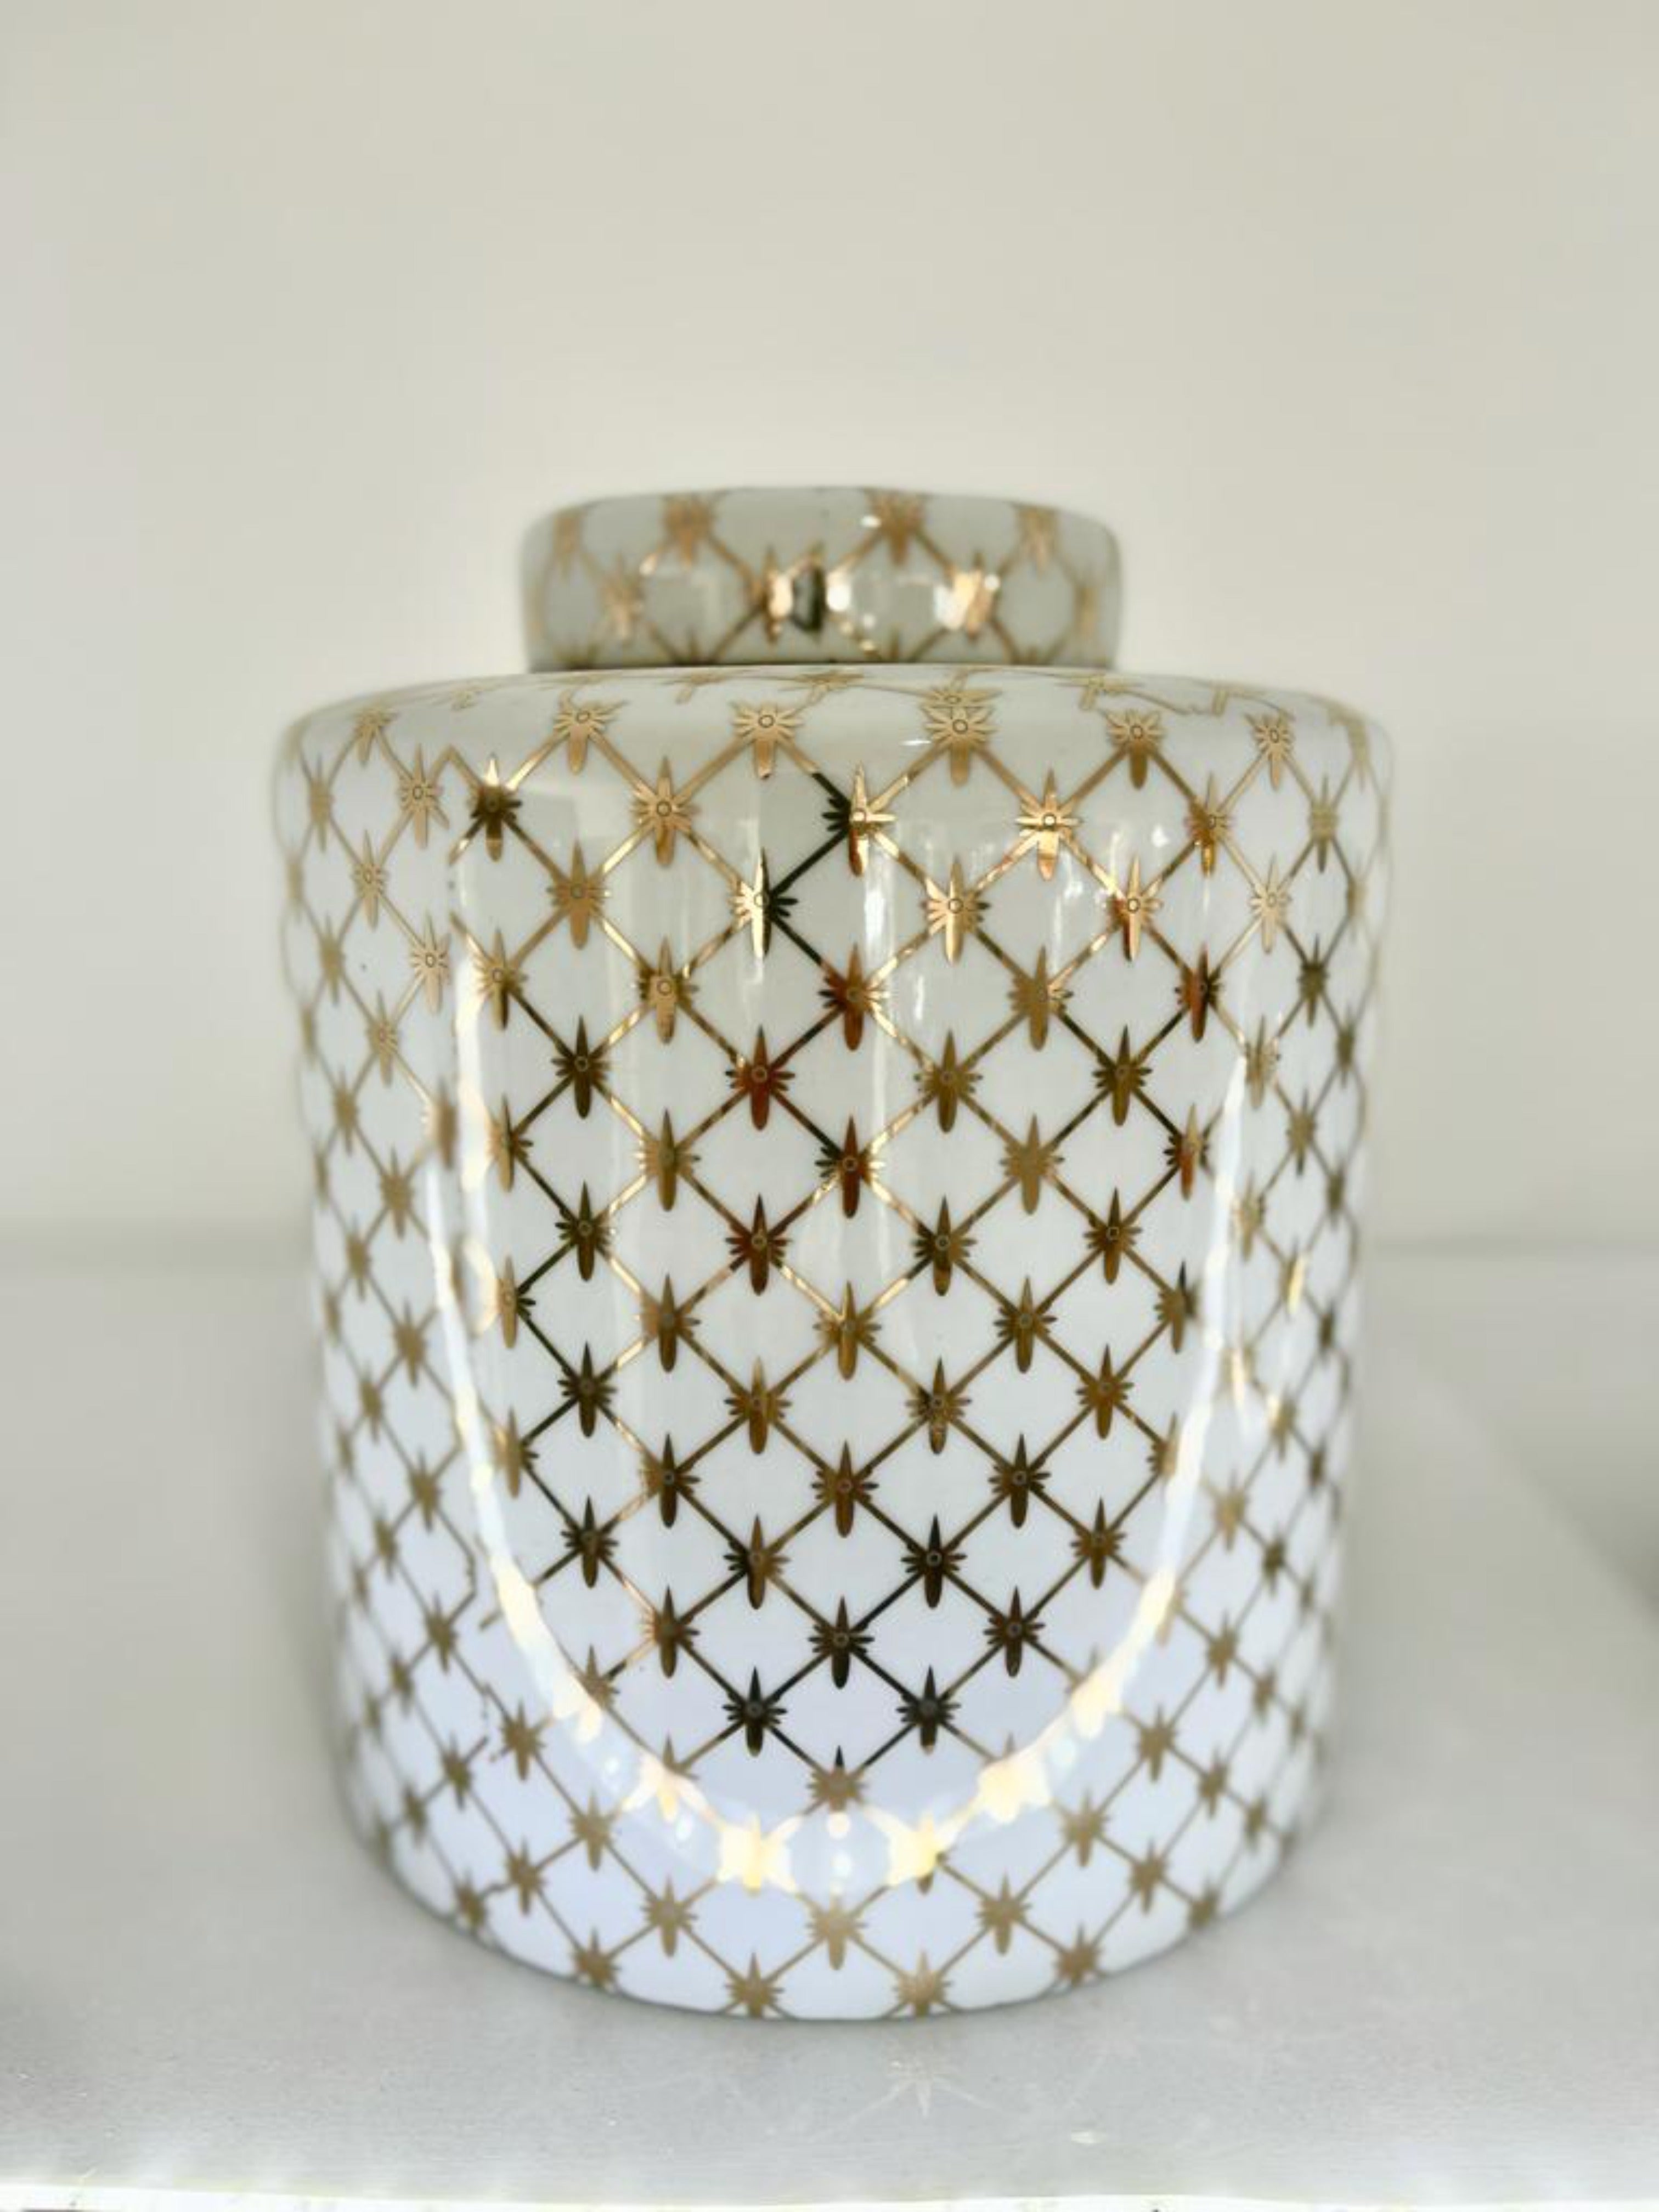 Gold and White Cross Patterned Ceramic Tea Jar